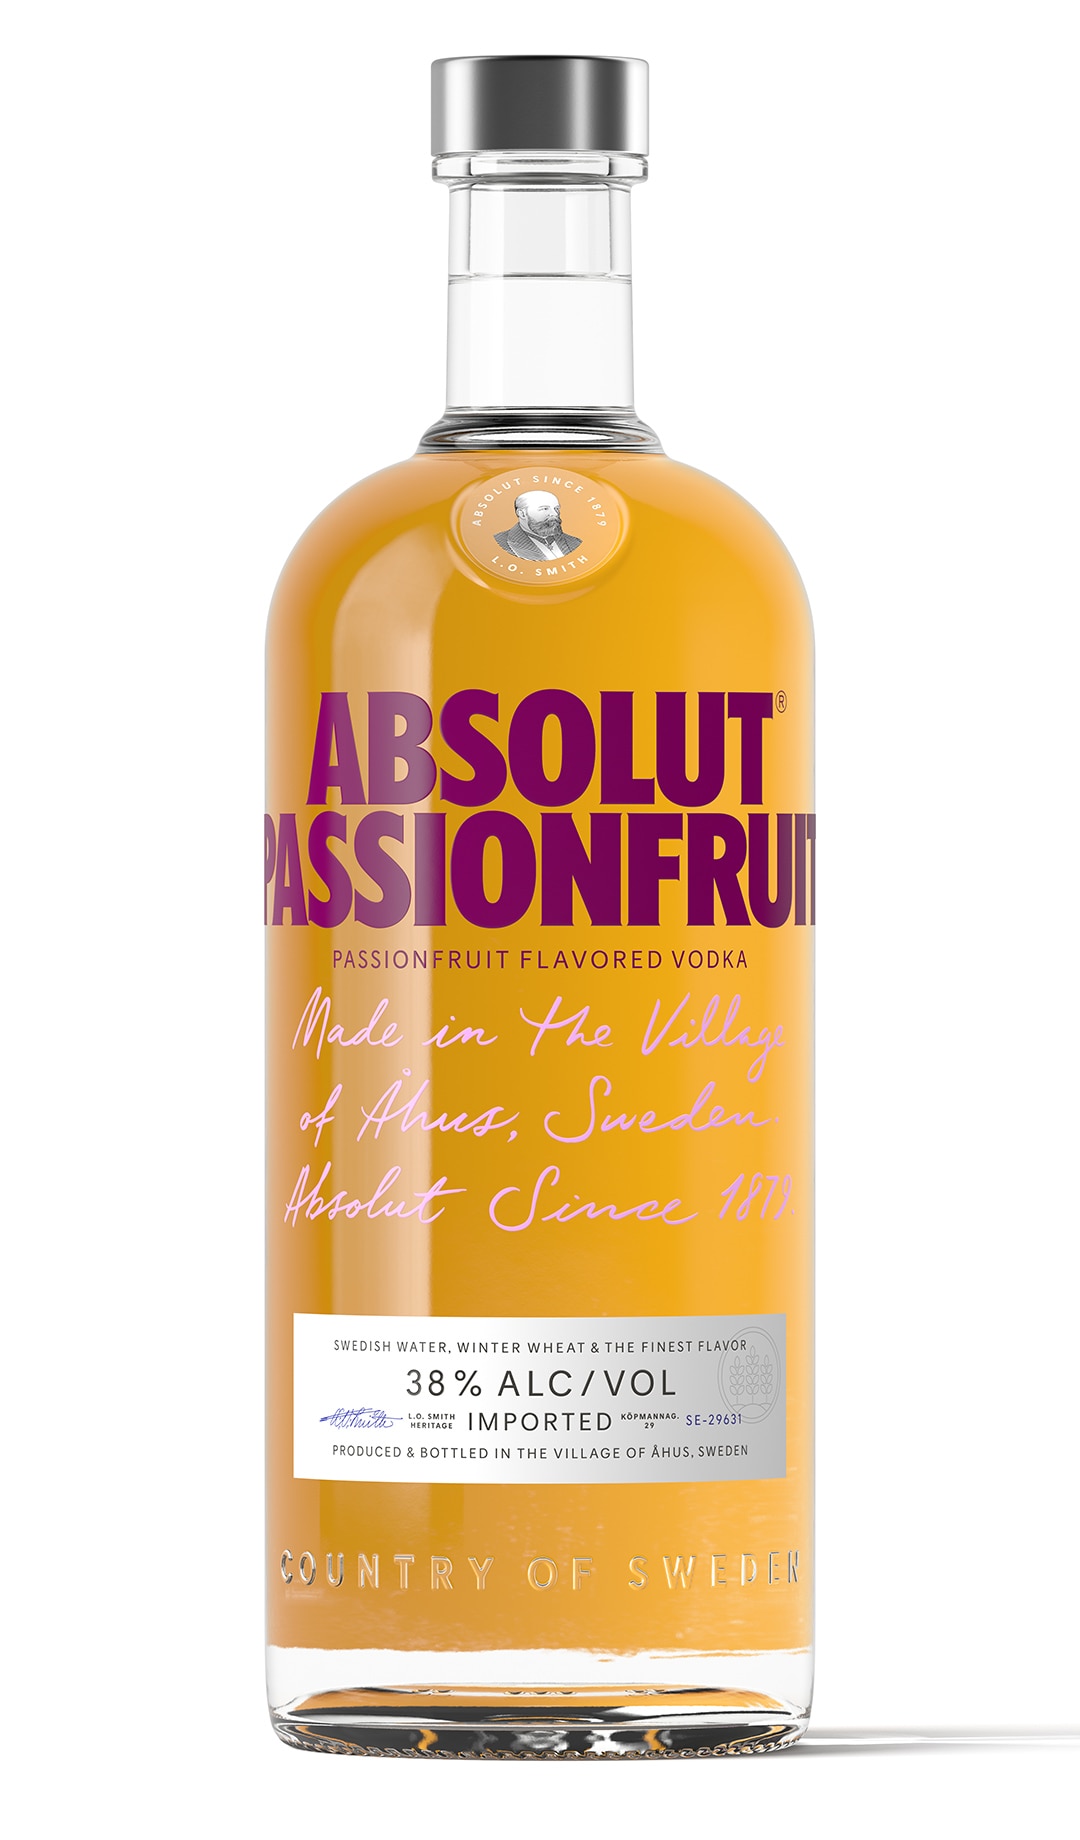 Absolut passionfruit